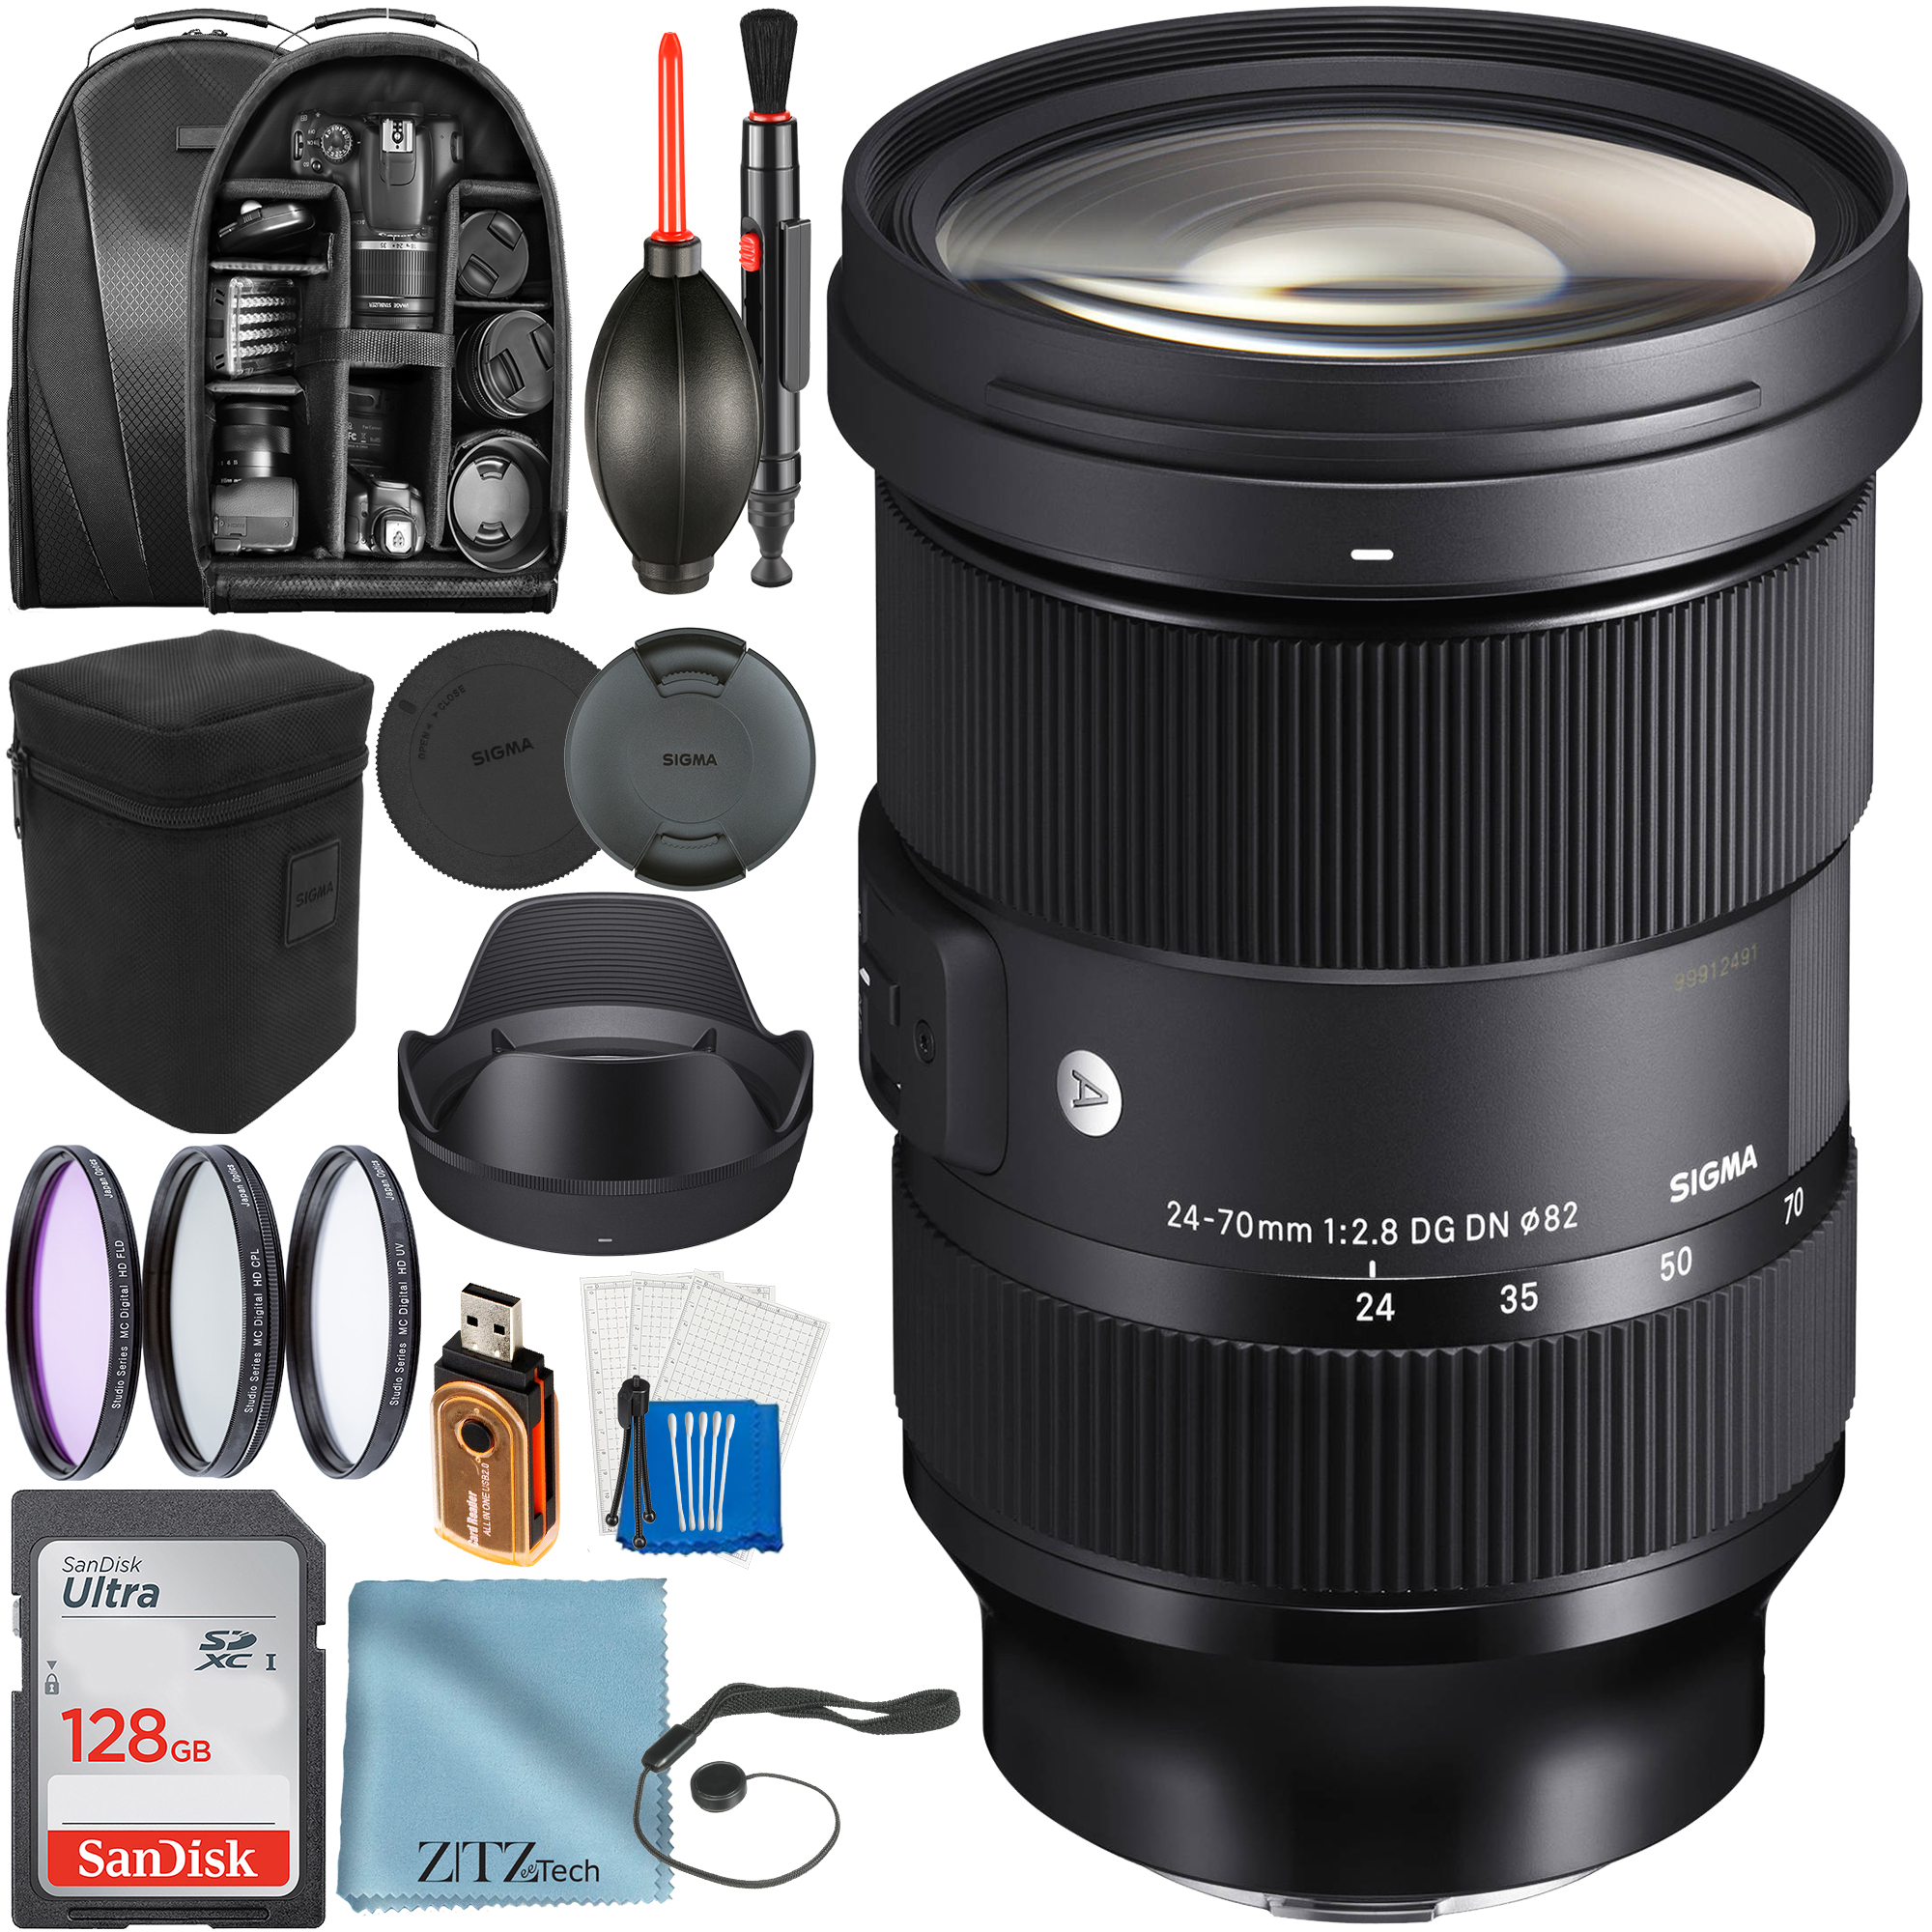 Sigma 24-70mm F/2.8 DG DN Art Lens Sony E-Mount with 128GB SanDisk Card + Backpack + Filter + ZeeTech Accessory Bundle